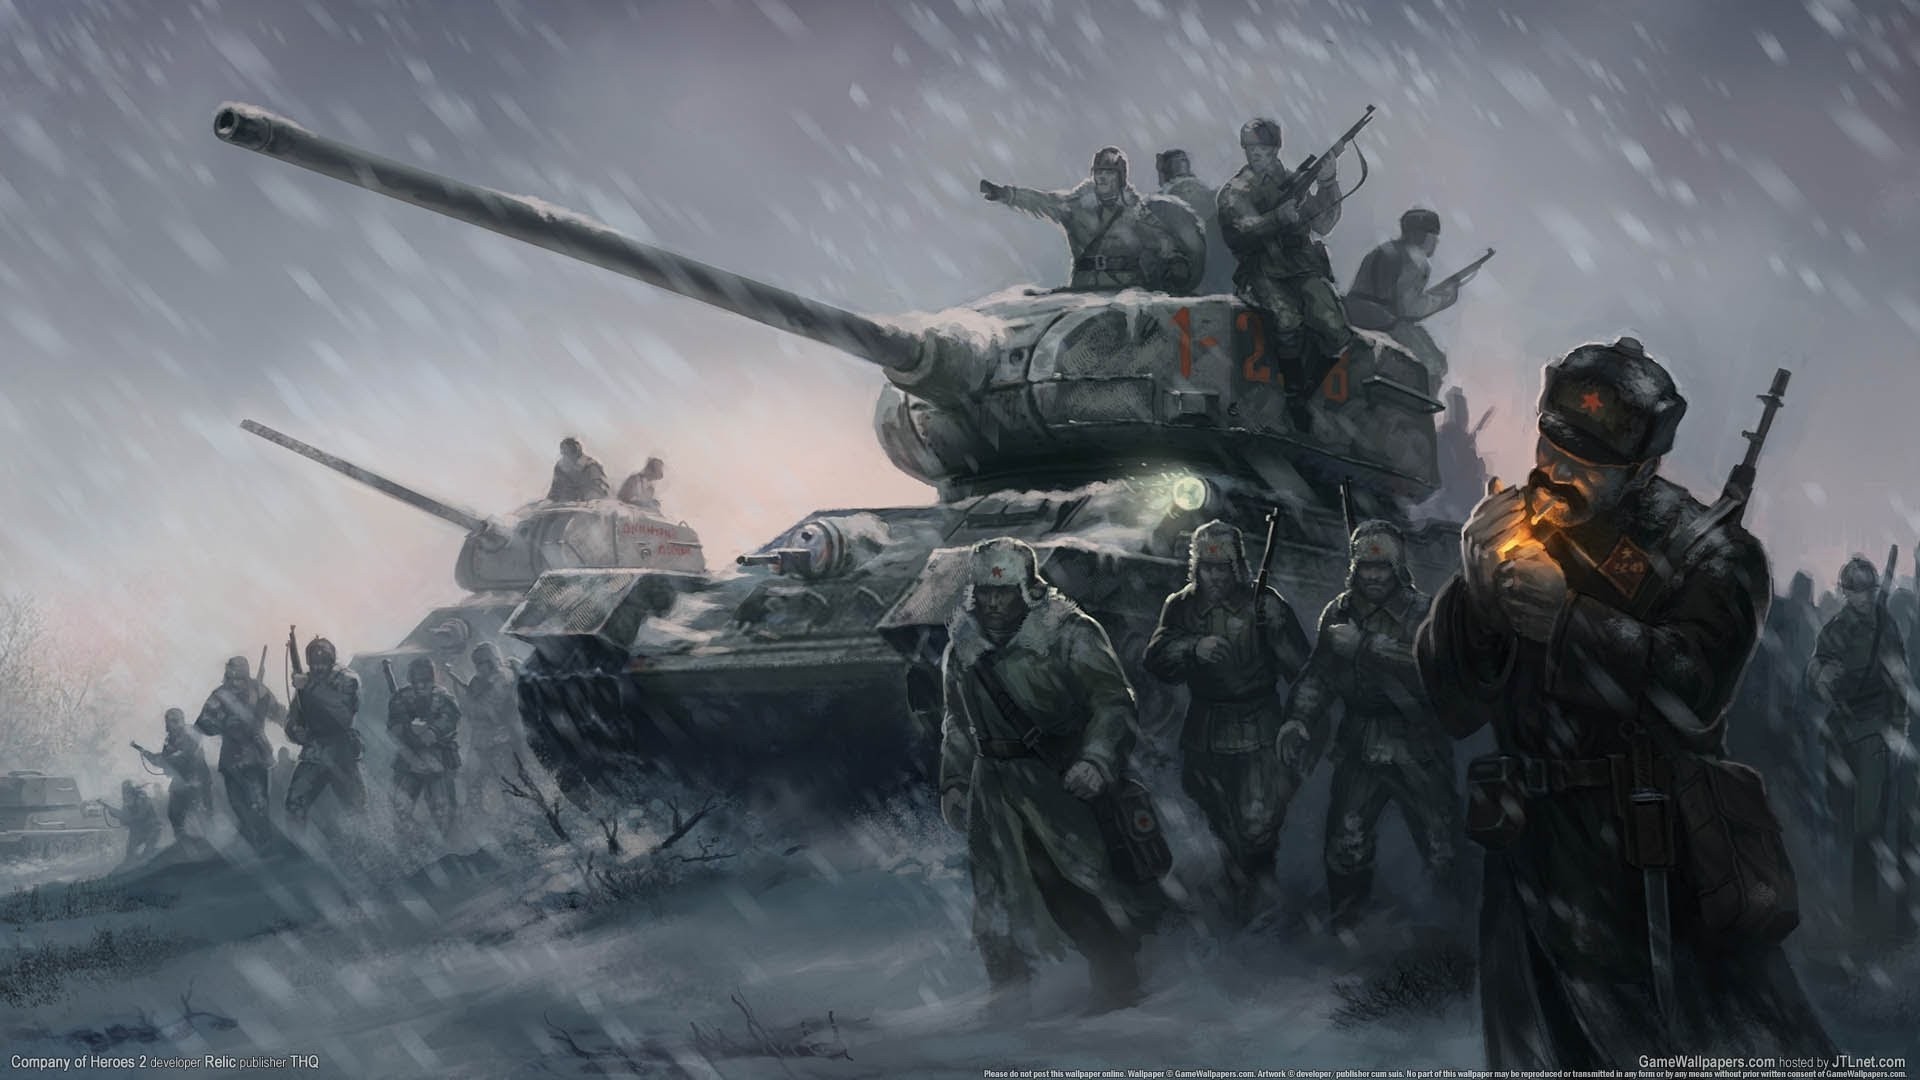 General 1920x1080 T-34 video games tank Company of Heroes 2 video game art vehicle military vehicle PC gaming USSR ushanka snow World War II Soviet Army